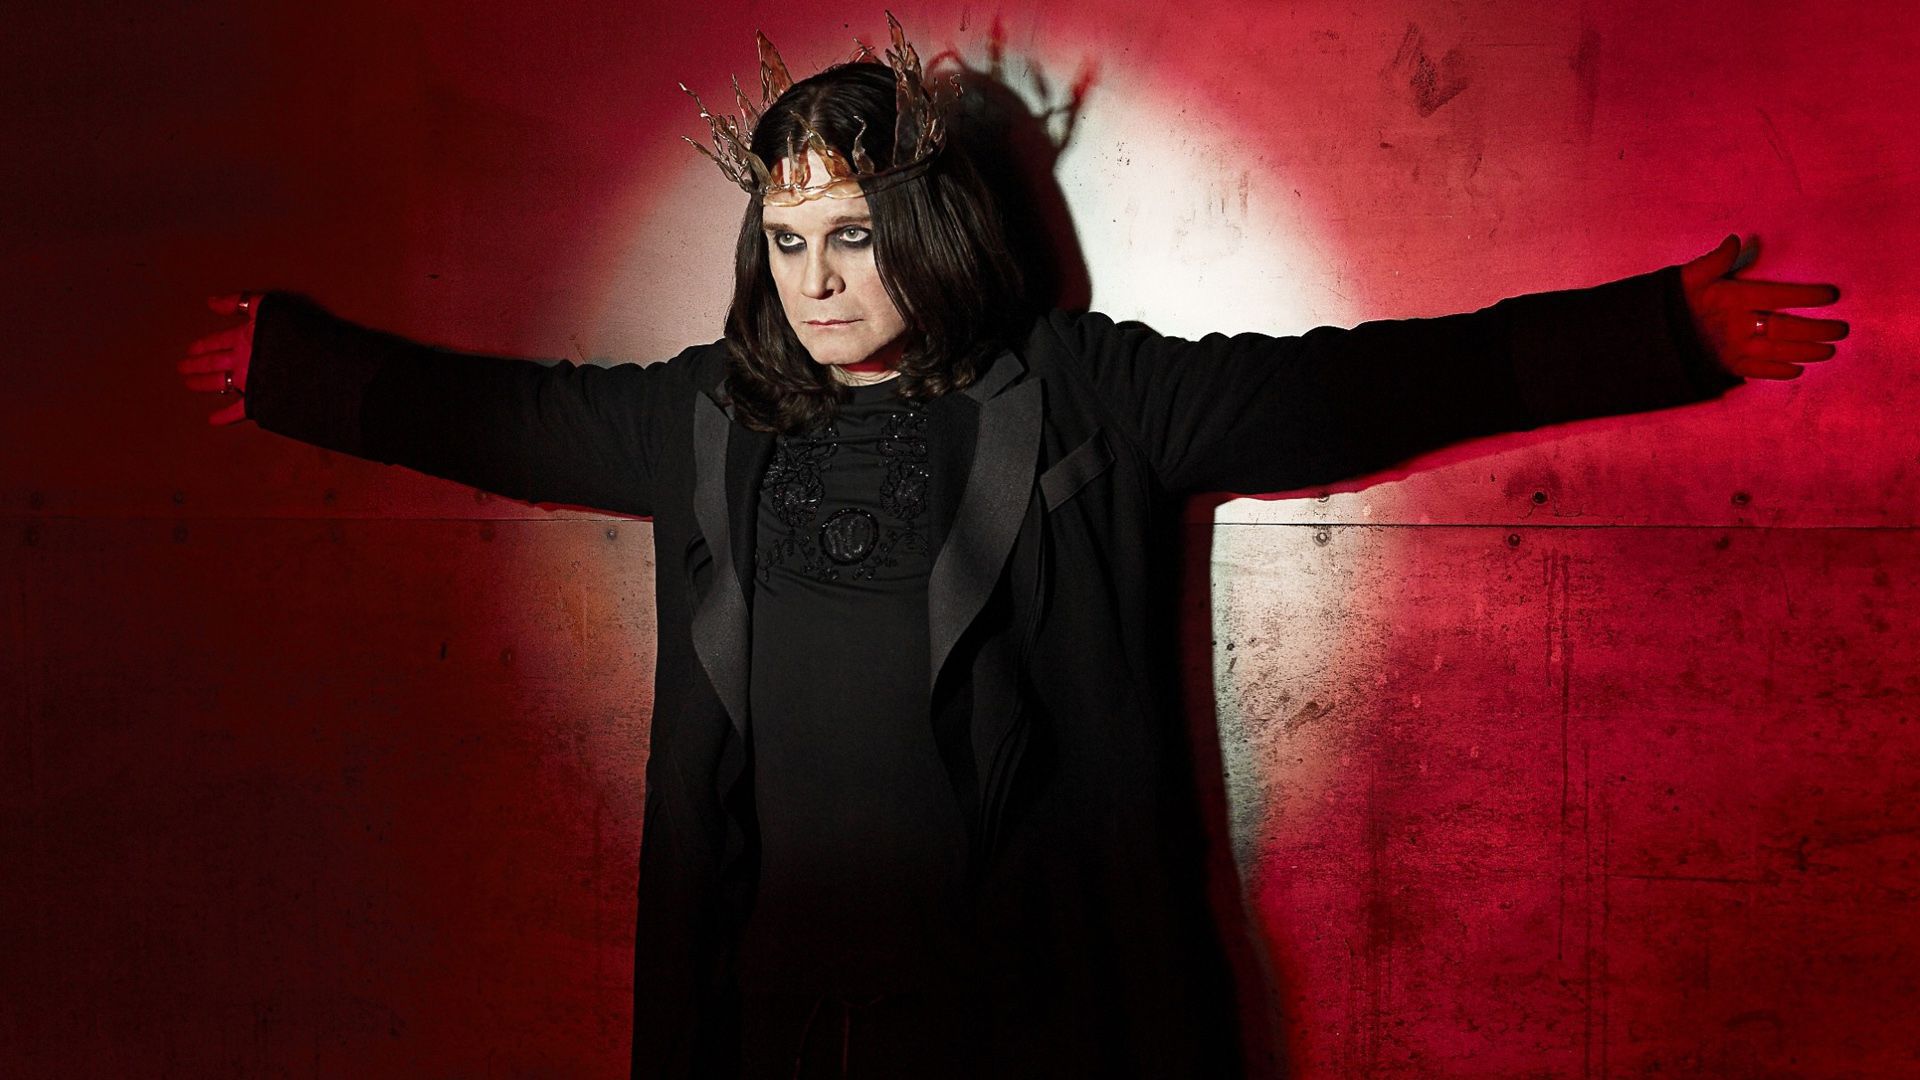 ozzy osbourne wallpaper,red,flash photography,photography,gesture,darkness